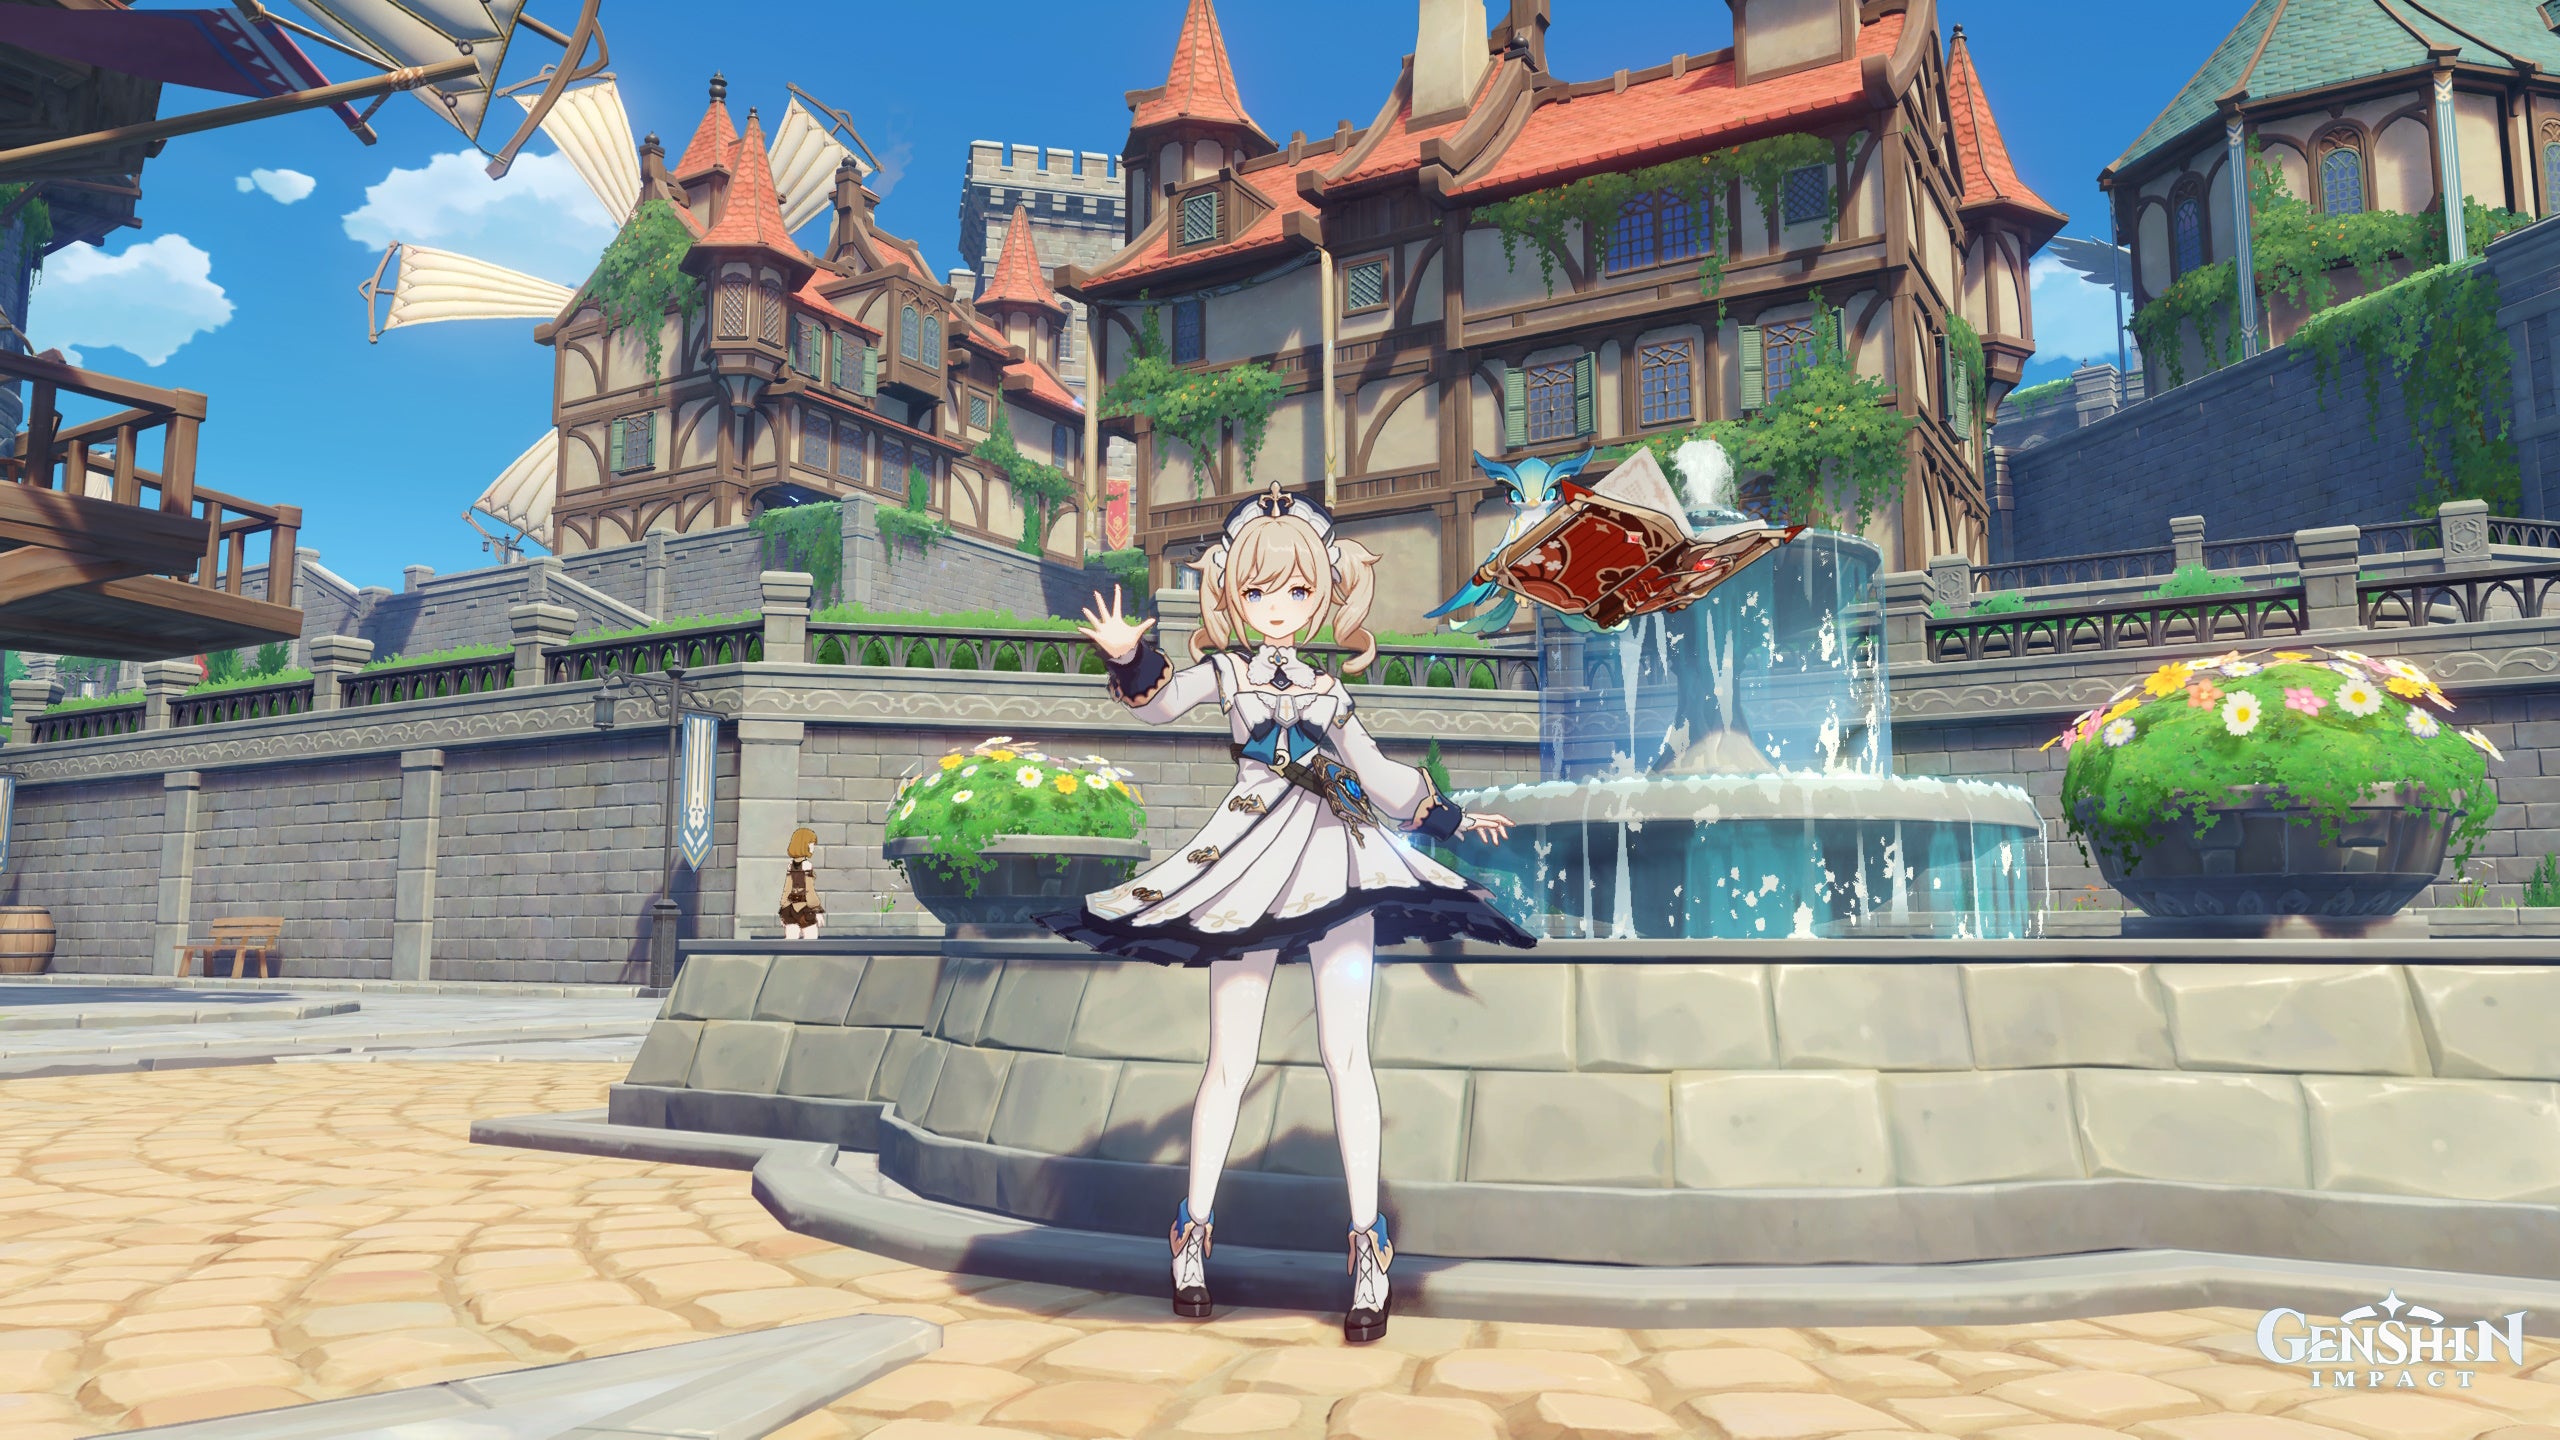 Genshin Impact Barbara build: An anime girl with blonde hair, wearing a blue and dove-grey dress with a matching hat, is standing on brick pavement in front of a stone fountain. She has a floating red book to her left and holds her right hand up in welcome